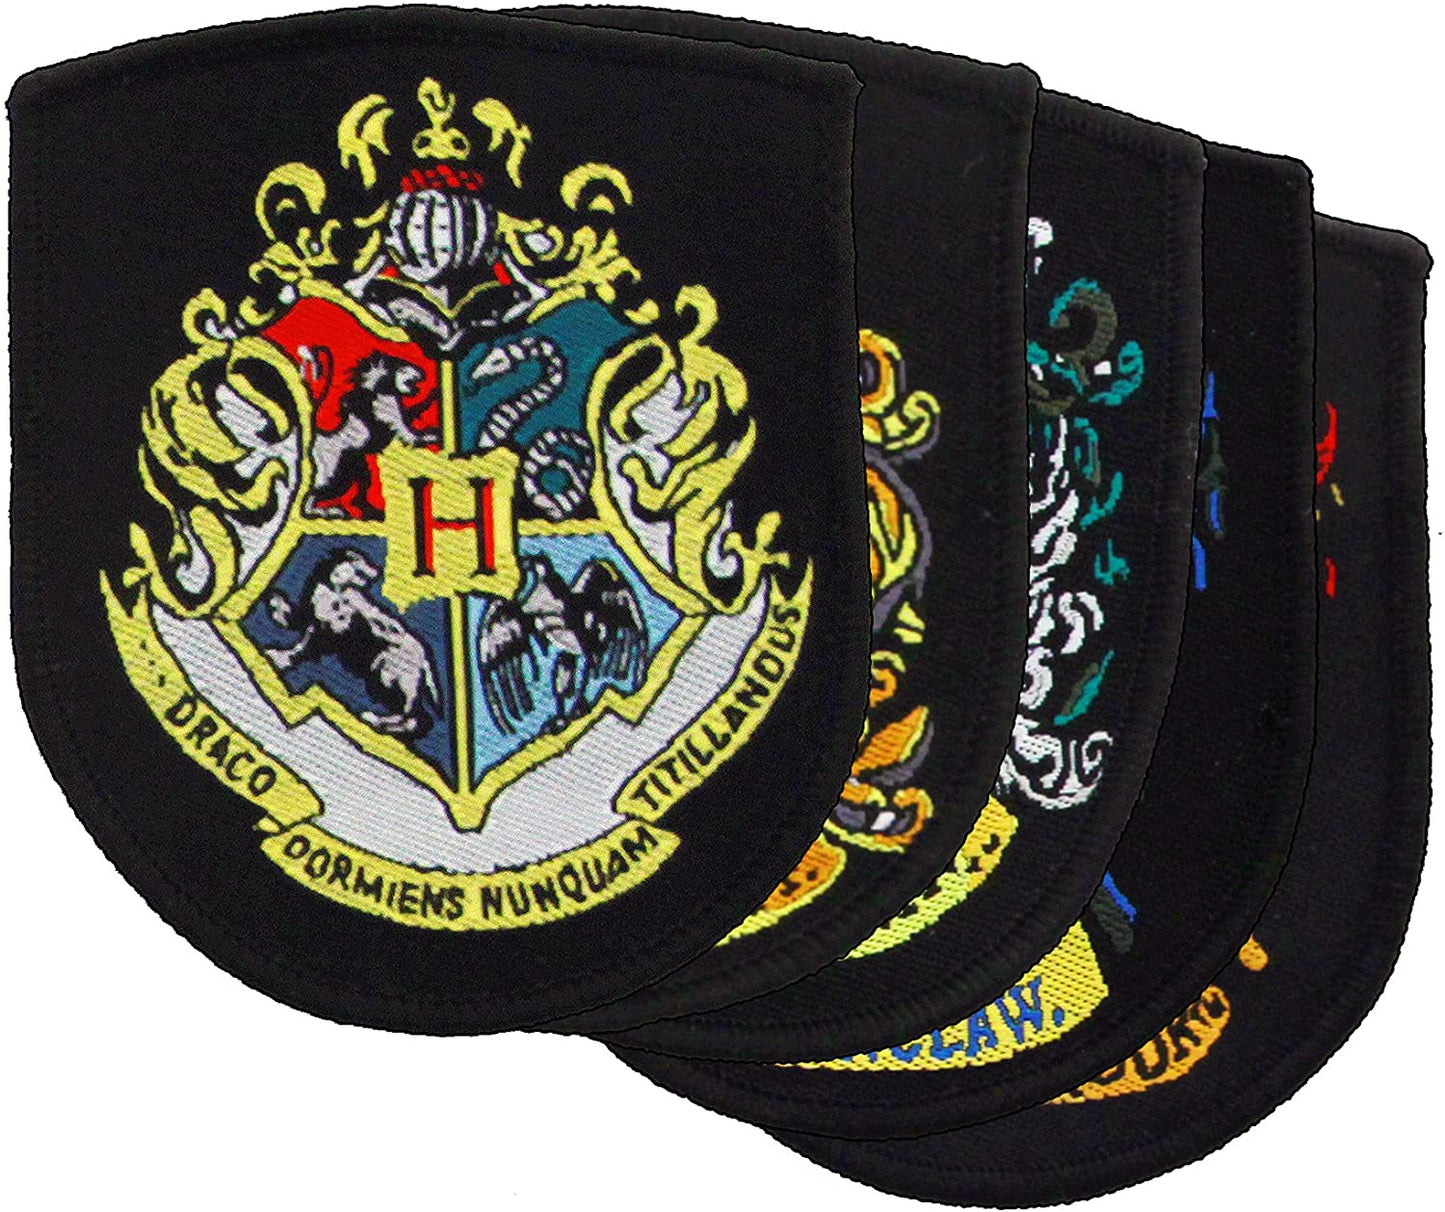 Cinereplicas Harry Potter - Official Patches Hogwarts Houses Crests (Set of 5)